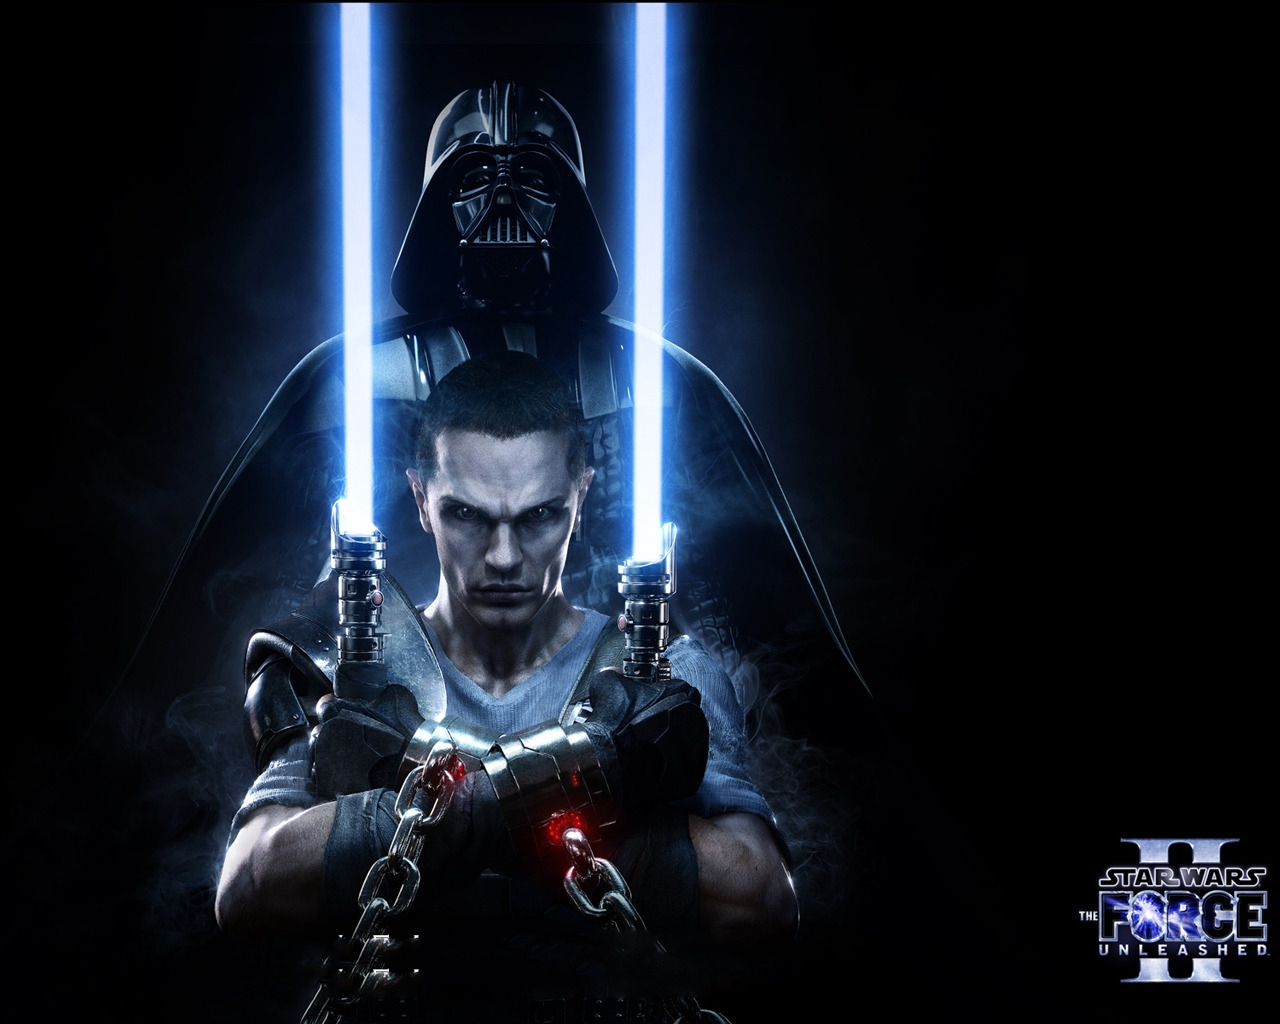 Star Wars The force Unleashed 2 Poster for 1280 x 1024 resolution